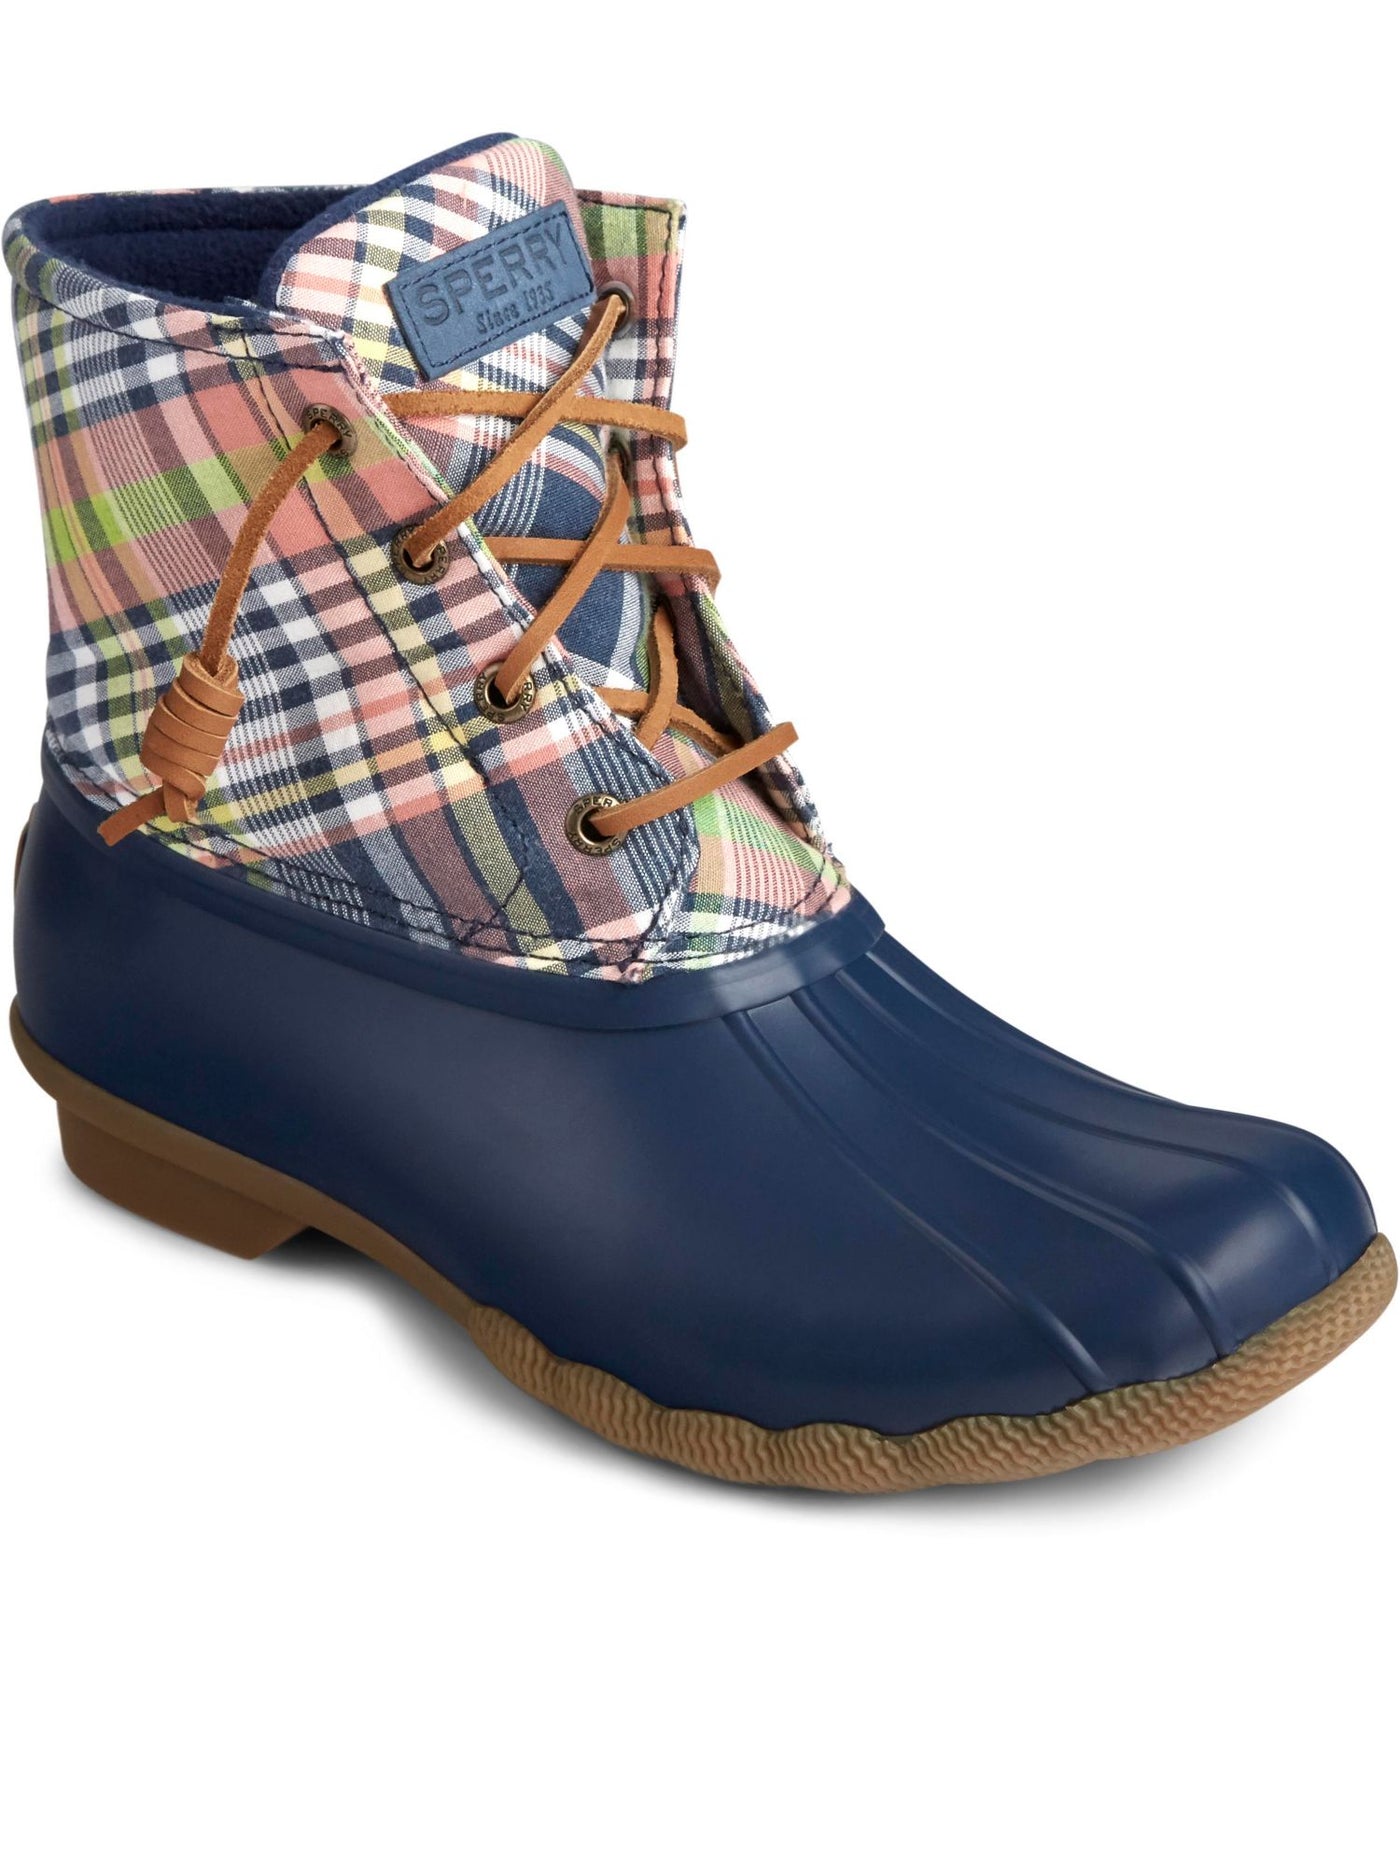 SPERRY Womens Blue Plaid Lace Non-Marking Water Resistant Saltwater Round Toe Block Heel Zip-Up Duck Boots 8.5 M